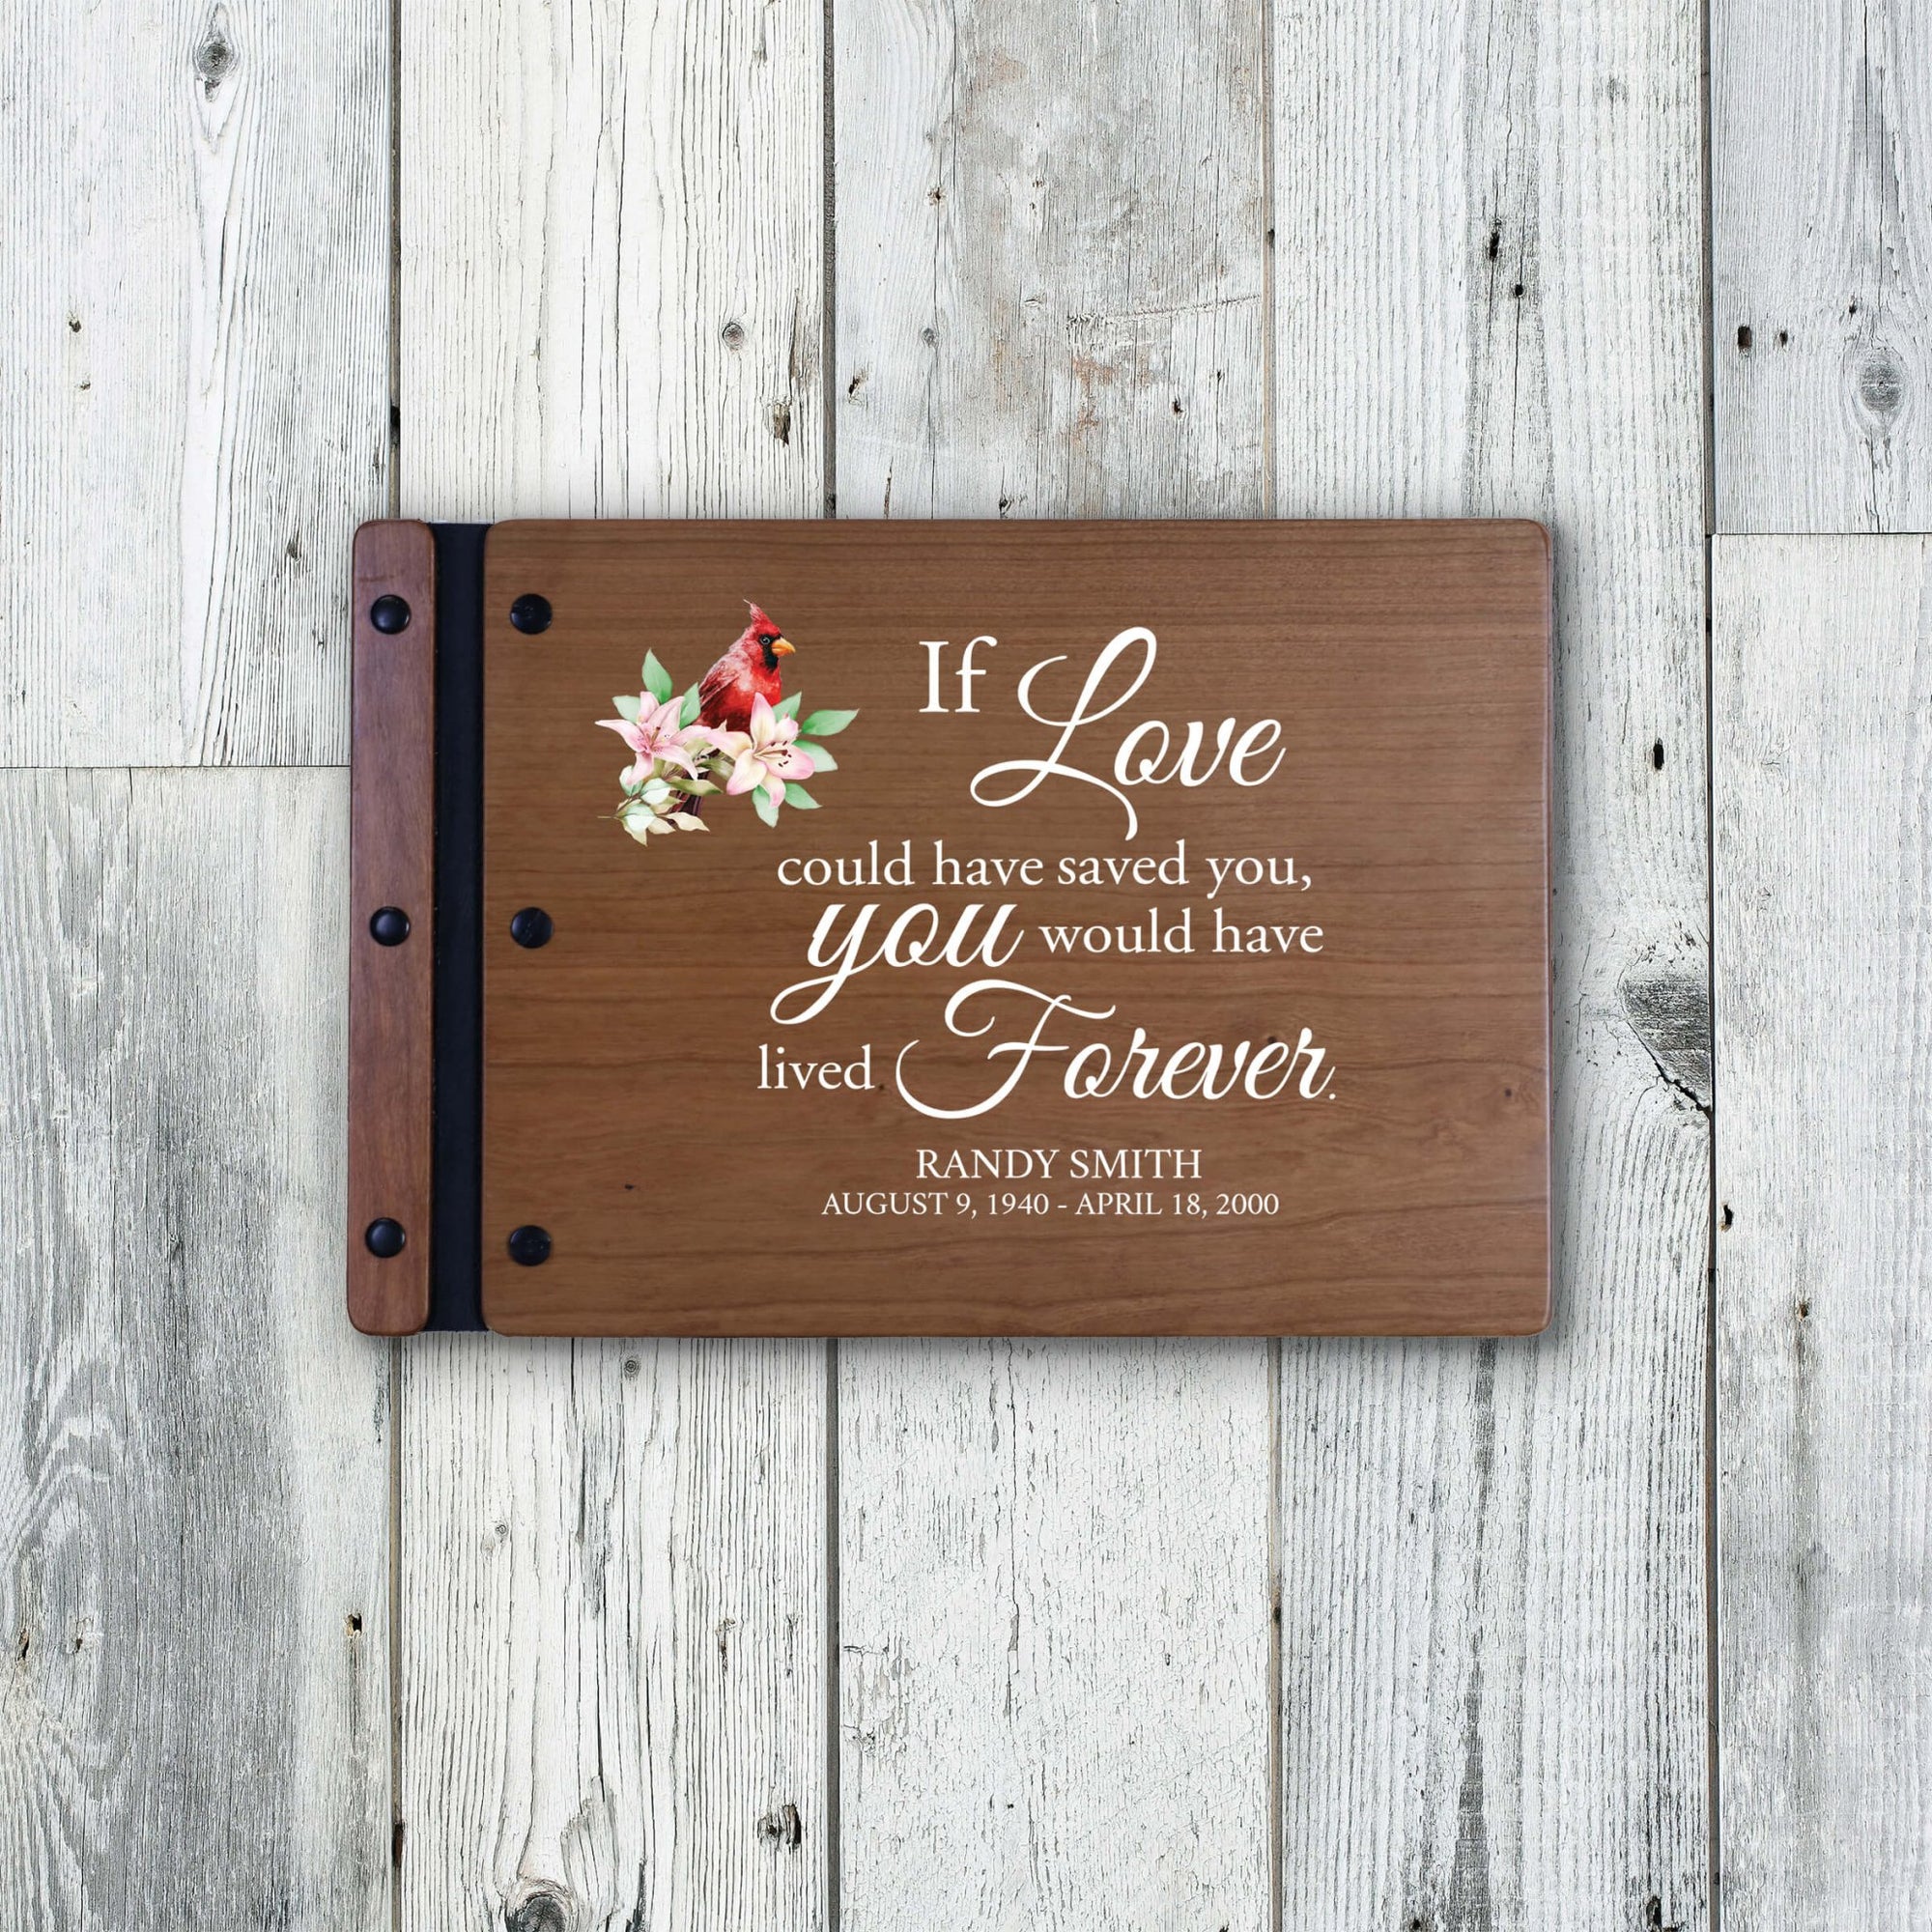 Personalized Funeral Wooden Guestbook for Memorial Service - If Love Could Have Saved - LifeSong Milestones